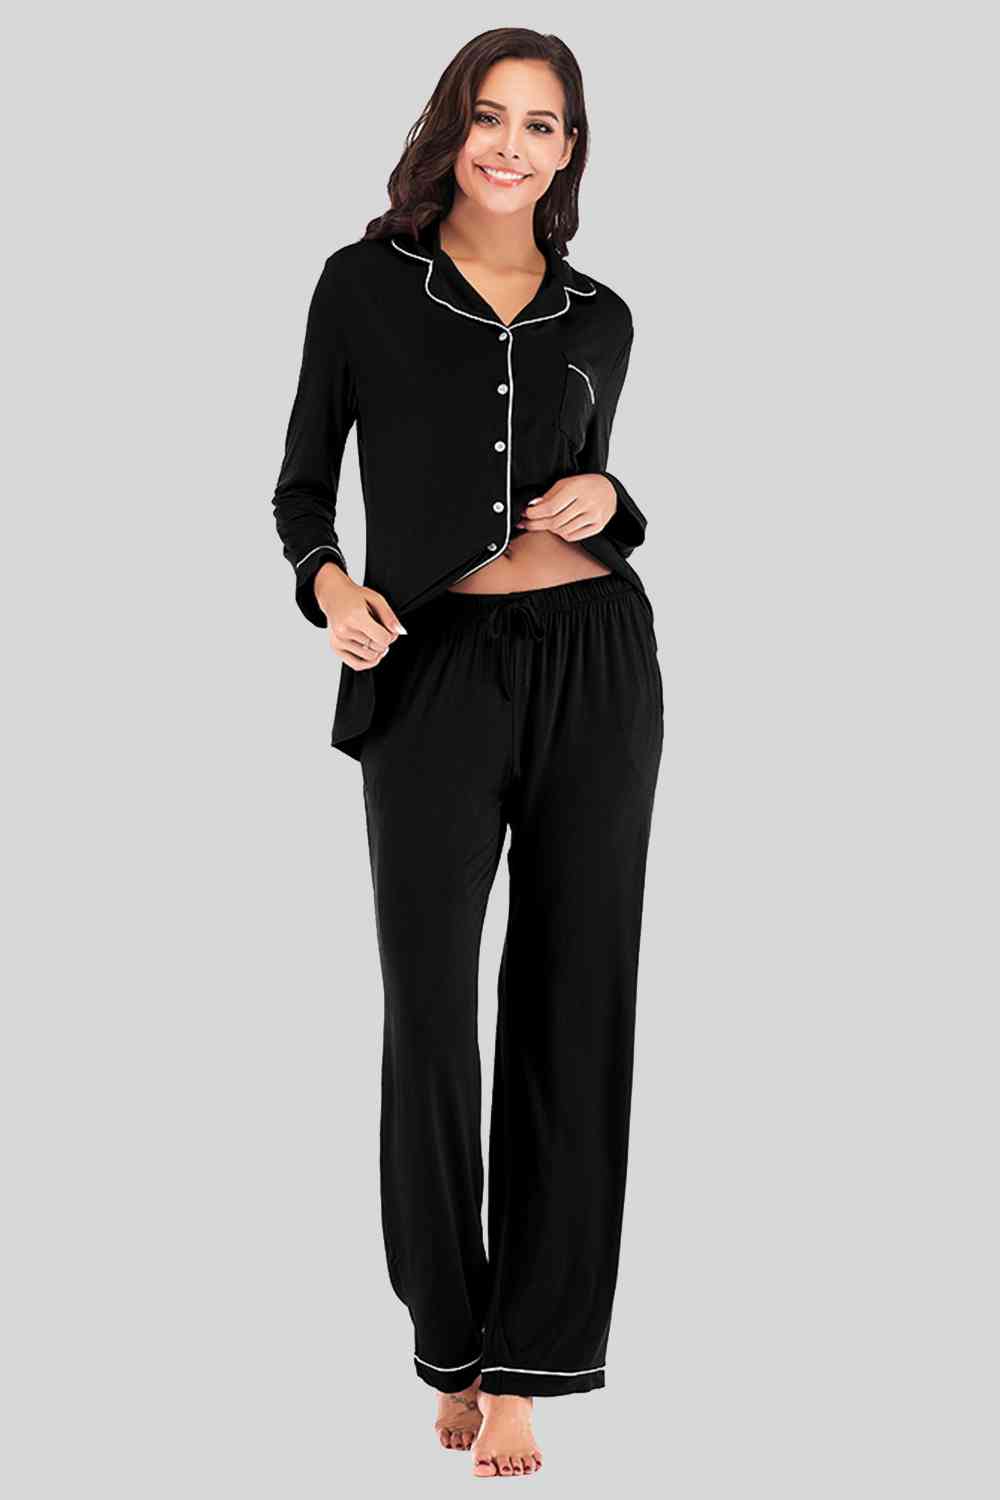 Collared Neck Long Sleeve Loungewear Set with Pockets Black